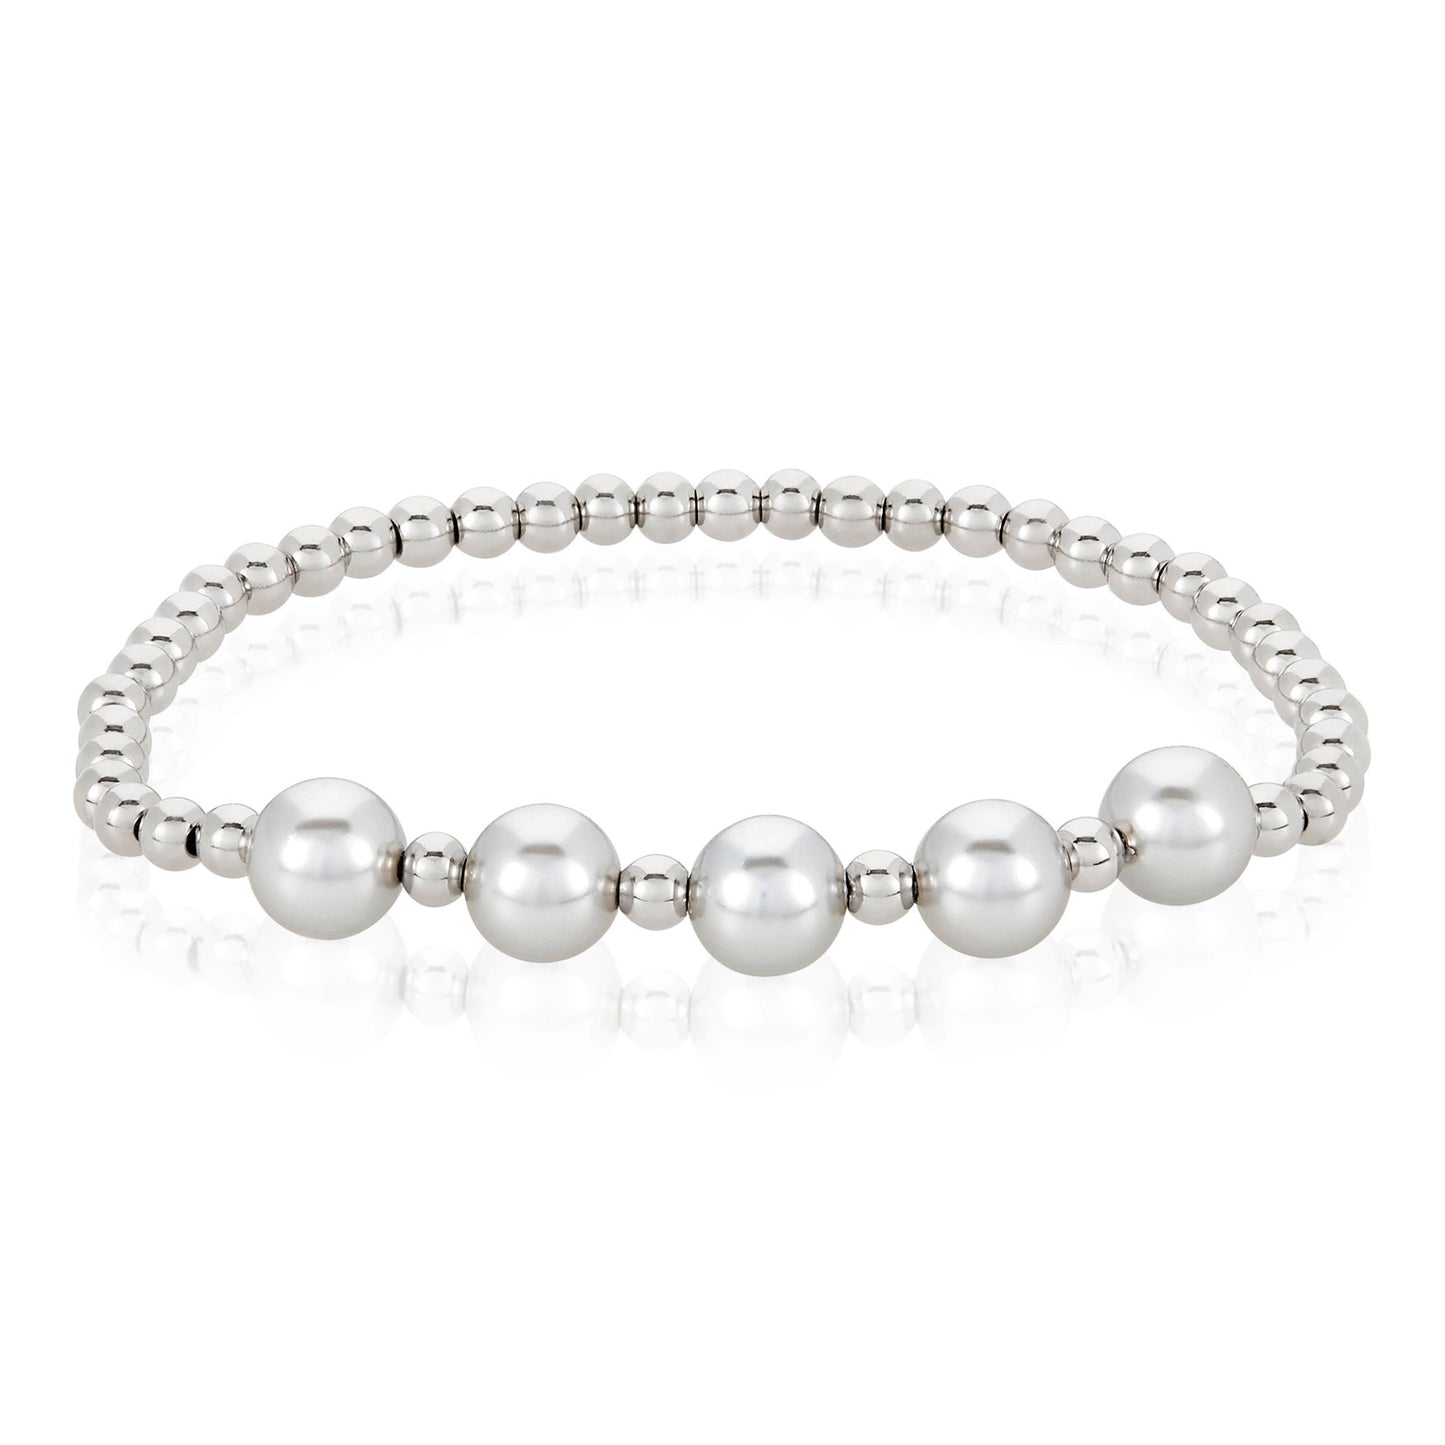 Crystal Pearl and Stainless Steel Beaded Stretch Bracelet (4mm Wide)